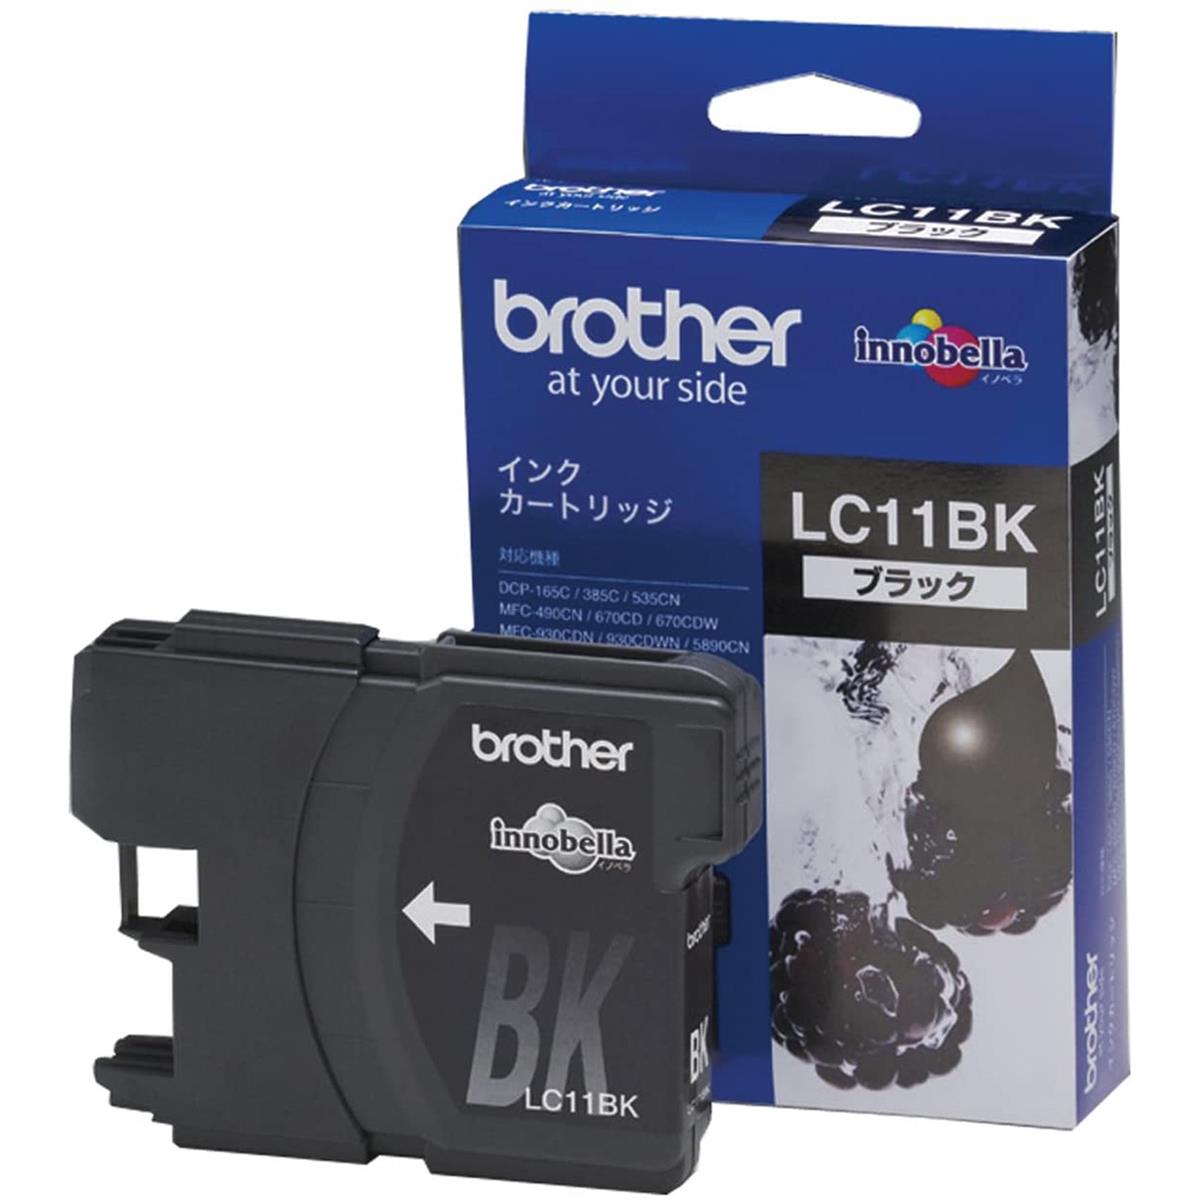 Image of Brother LC11BK Black Ink Cartridge for MFC-7050C